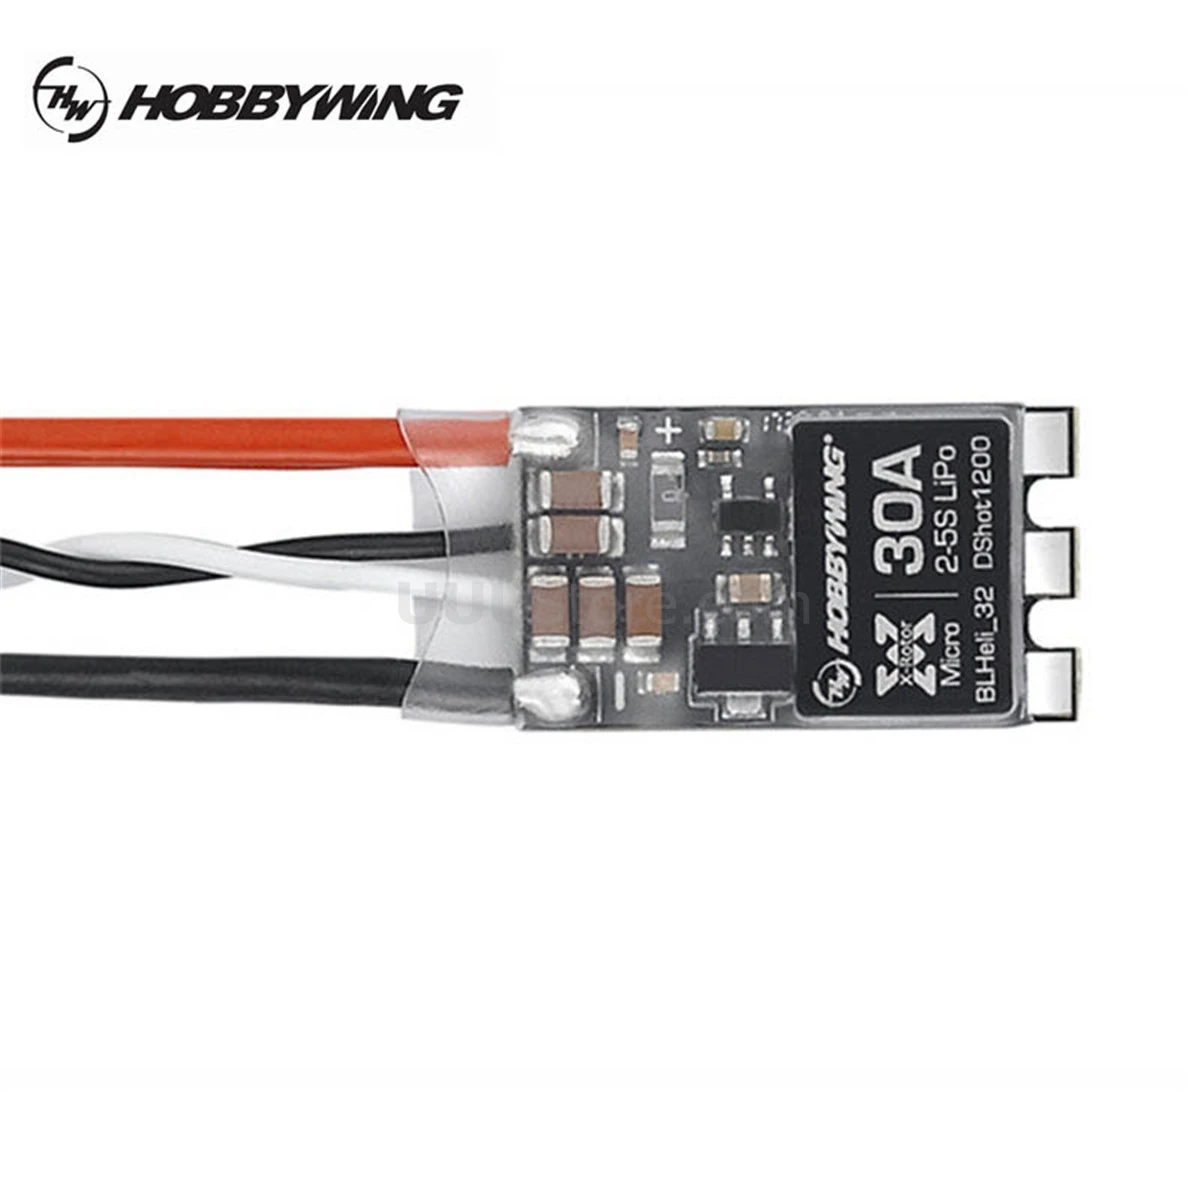 4pcs/lot Hobbywing XRotor Micro BLHeli-s 30A ESC Brushless Speed Controller for RC Racer Drone FPV Racing Quadcopter 1